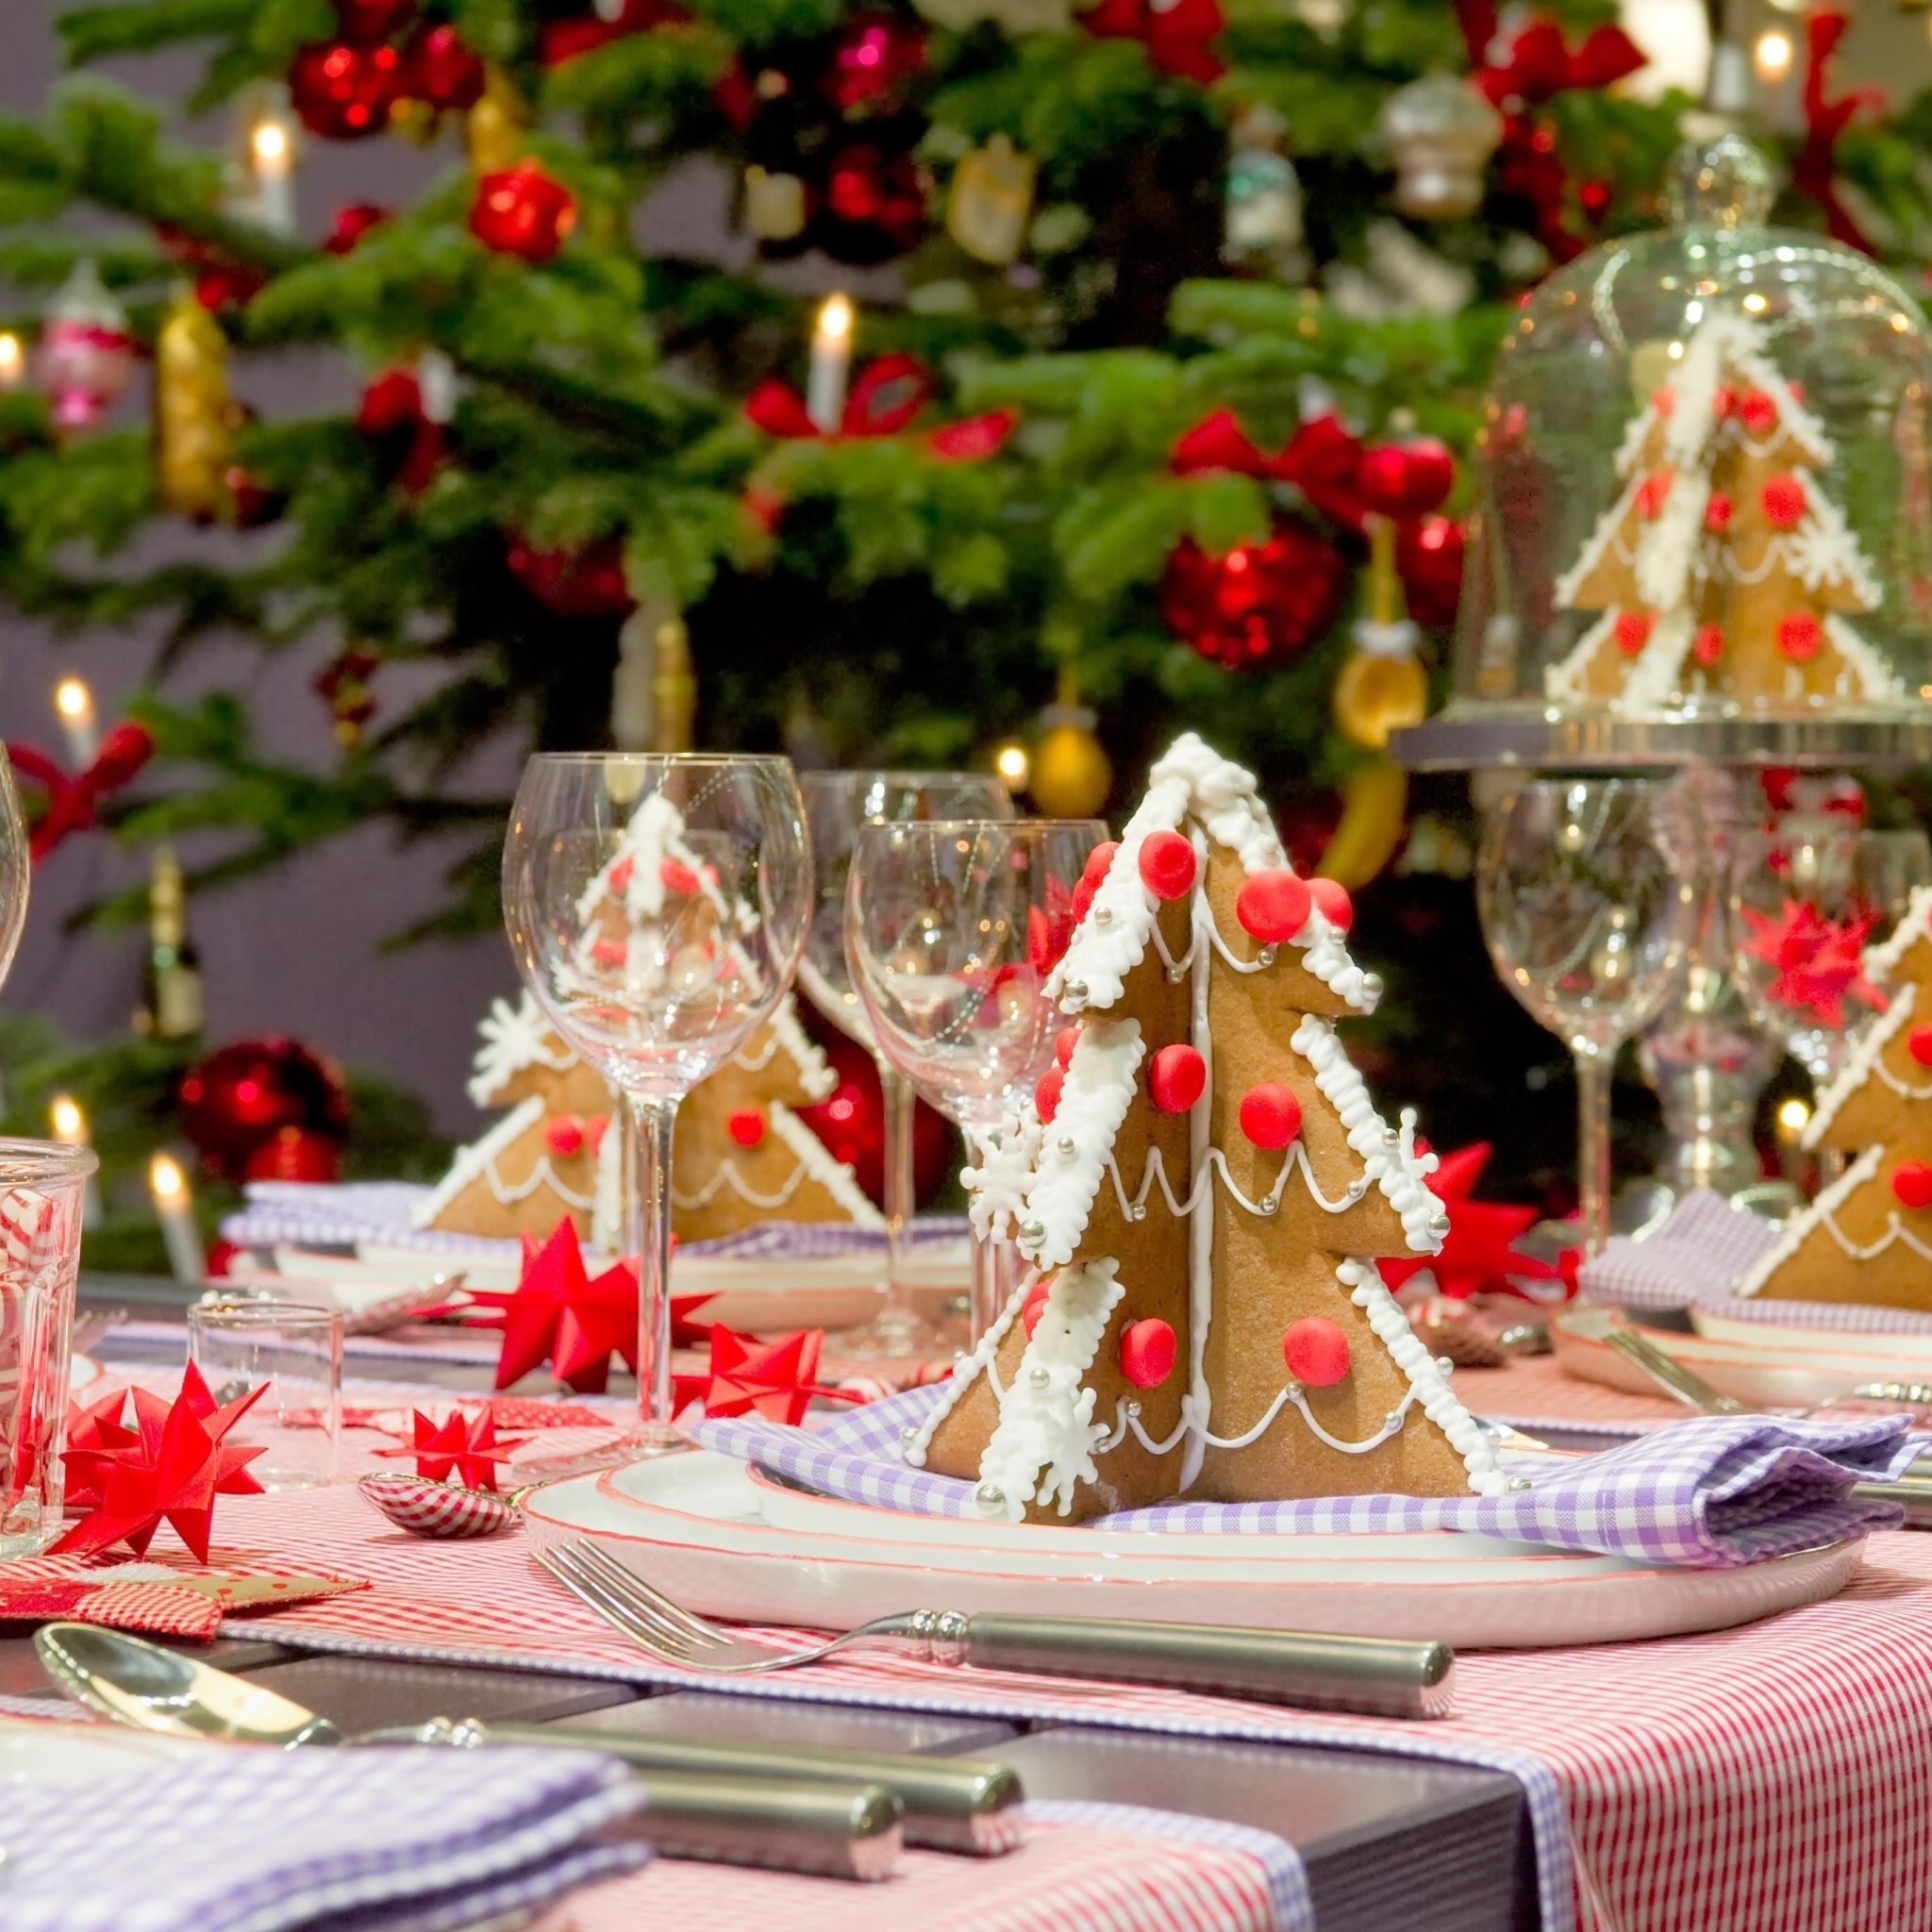 Christmas Table Decorations Ideas wallpaper 2048x2048